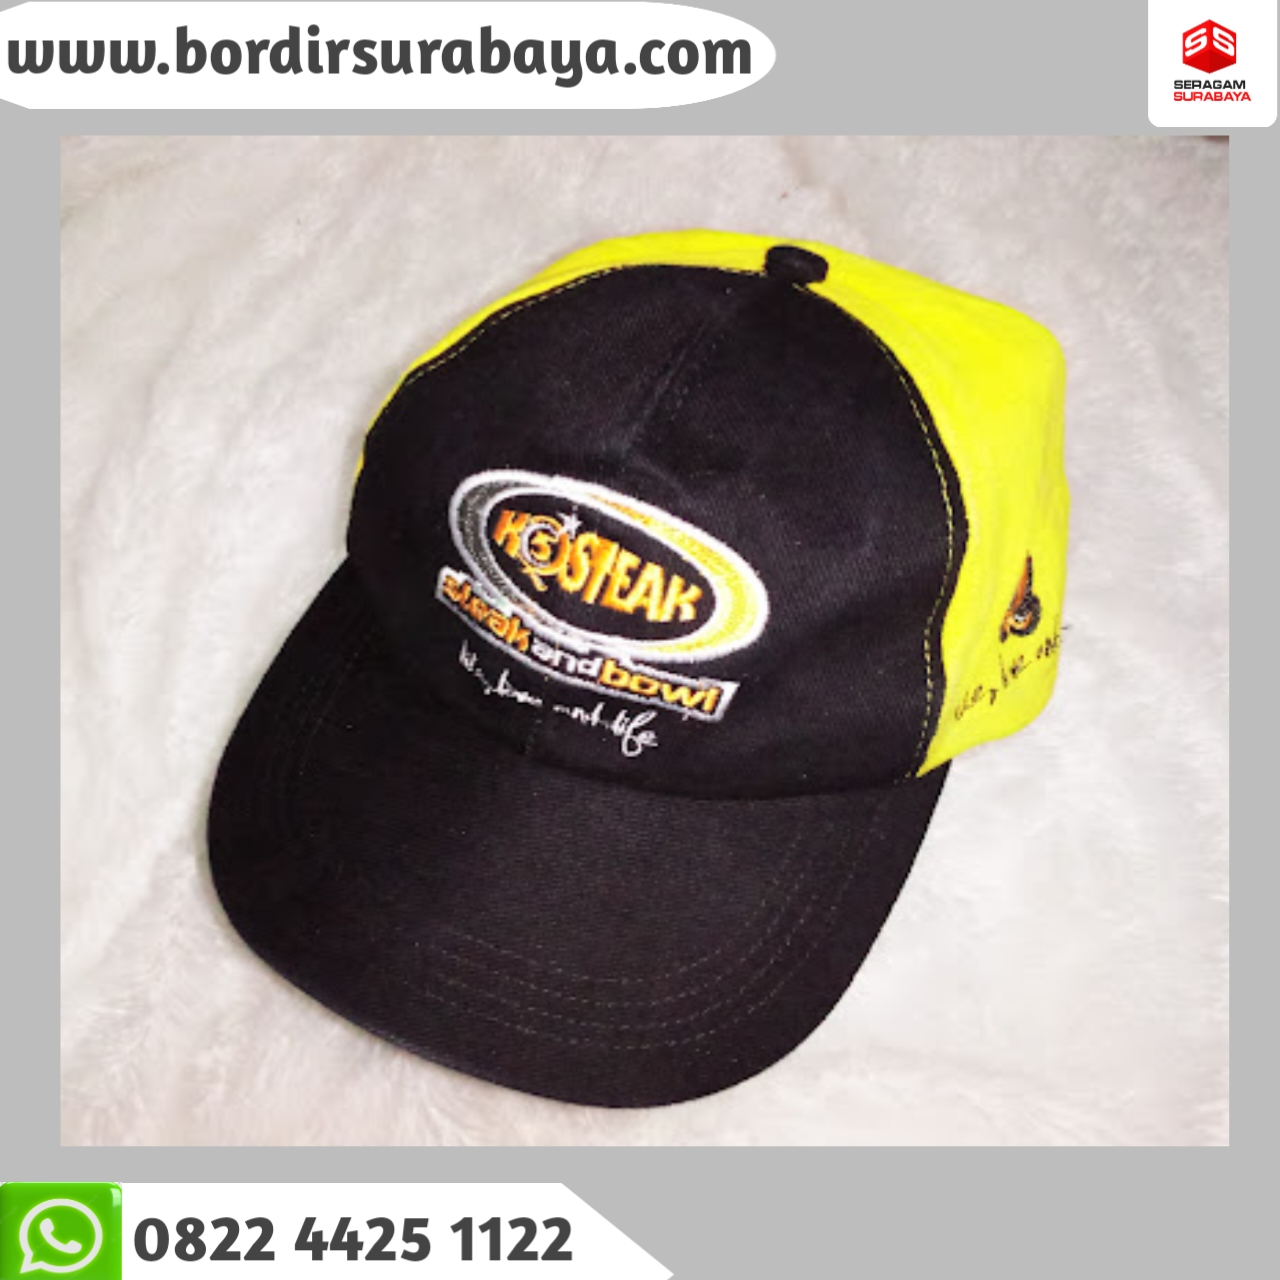 Read more about the article Topi bordir custom